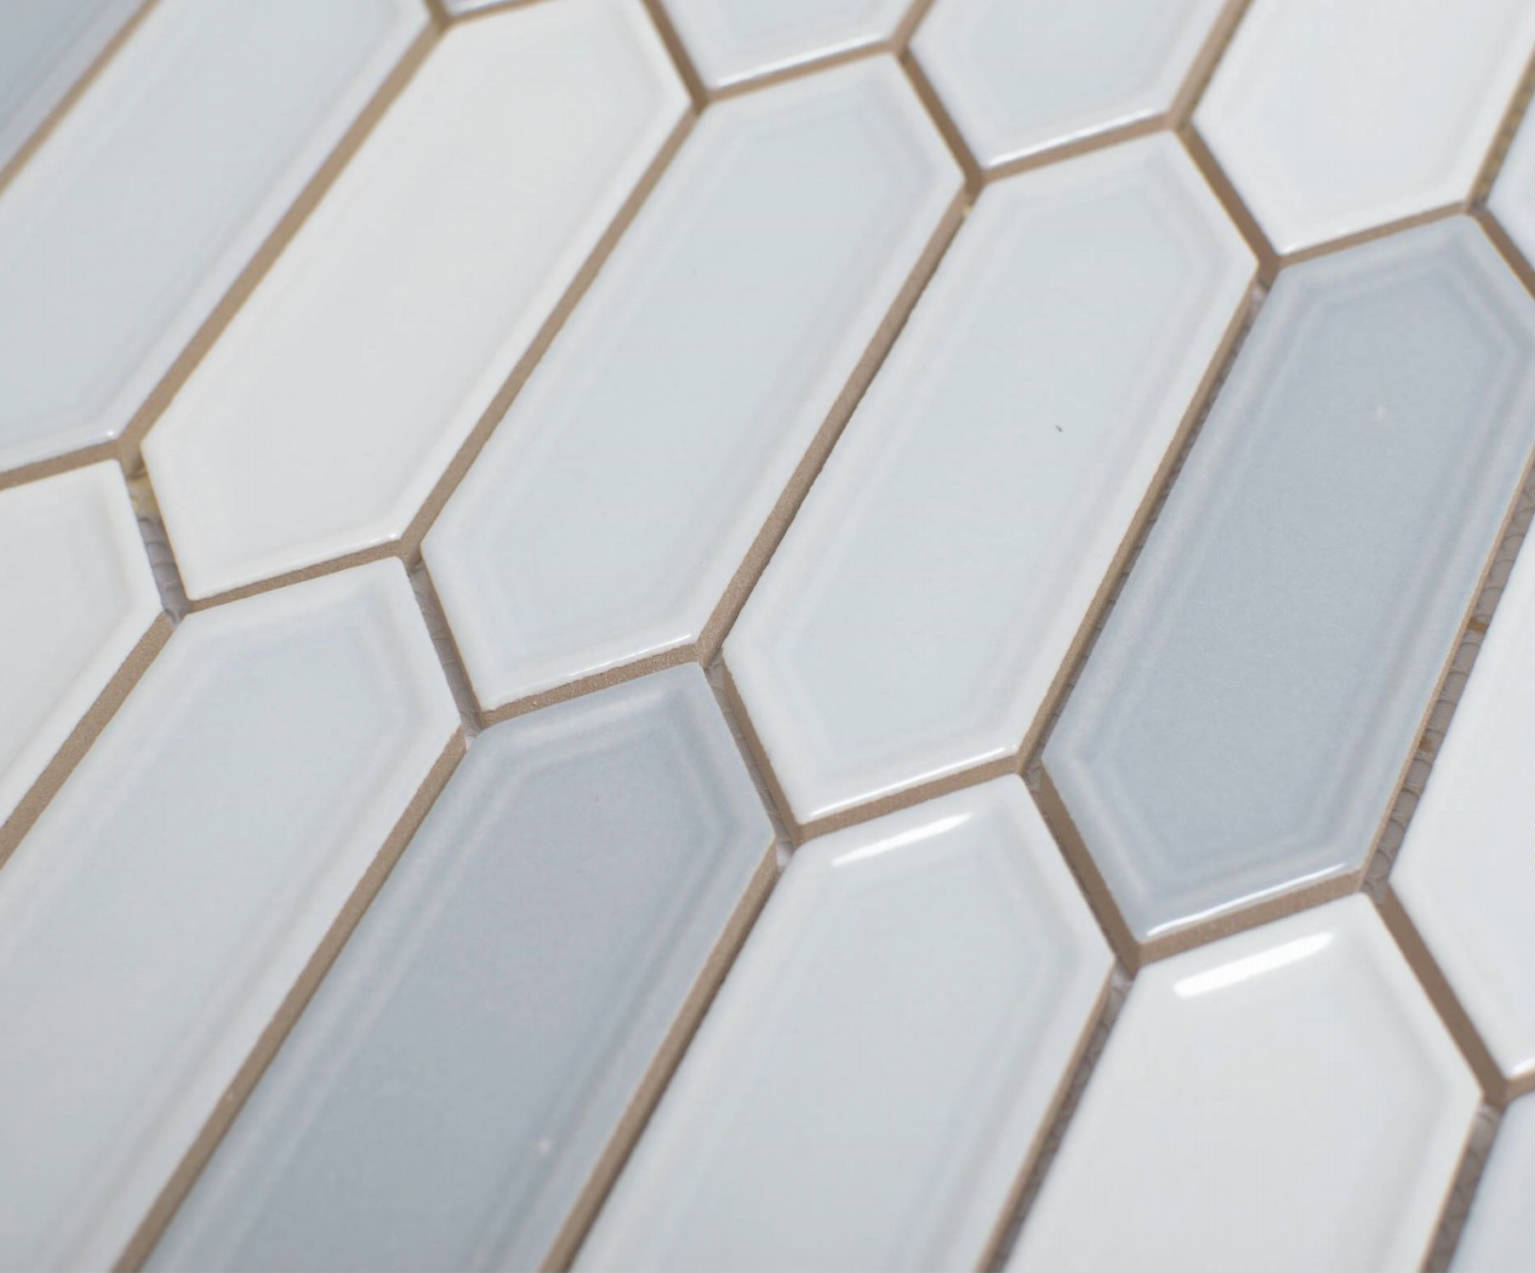 QSSPK-131415 | Stones And More | Finest selection of Mosaics, Glass, Tile and Stone